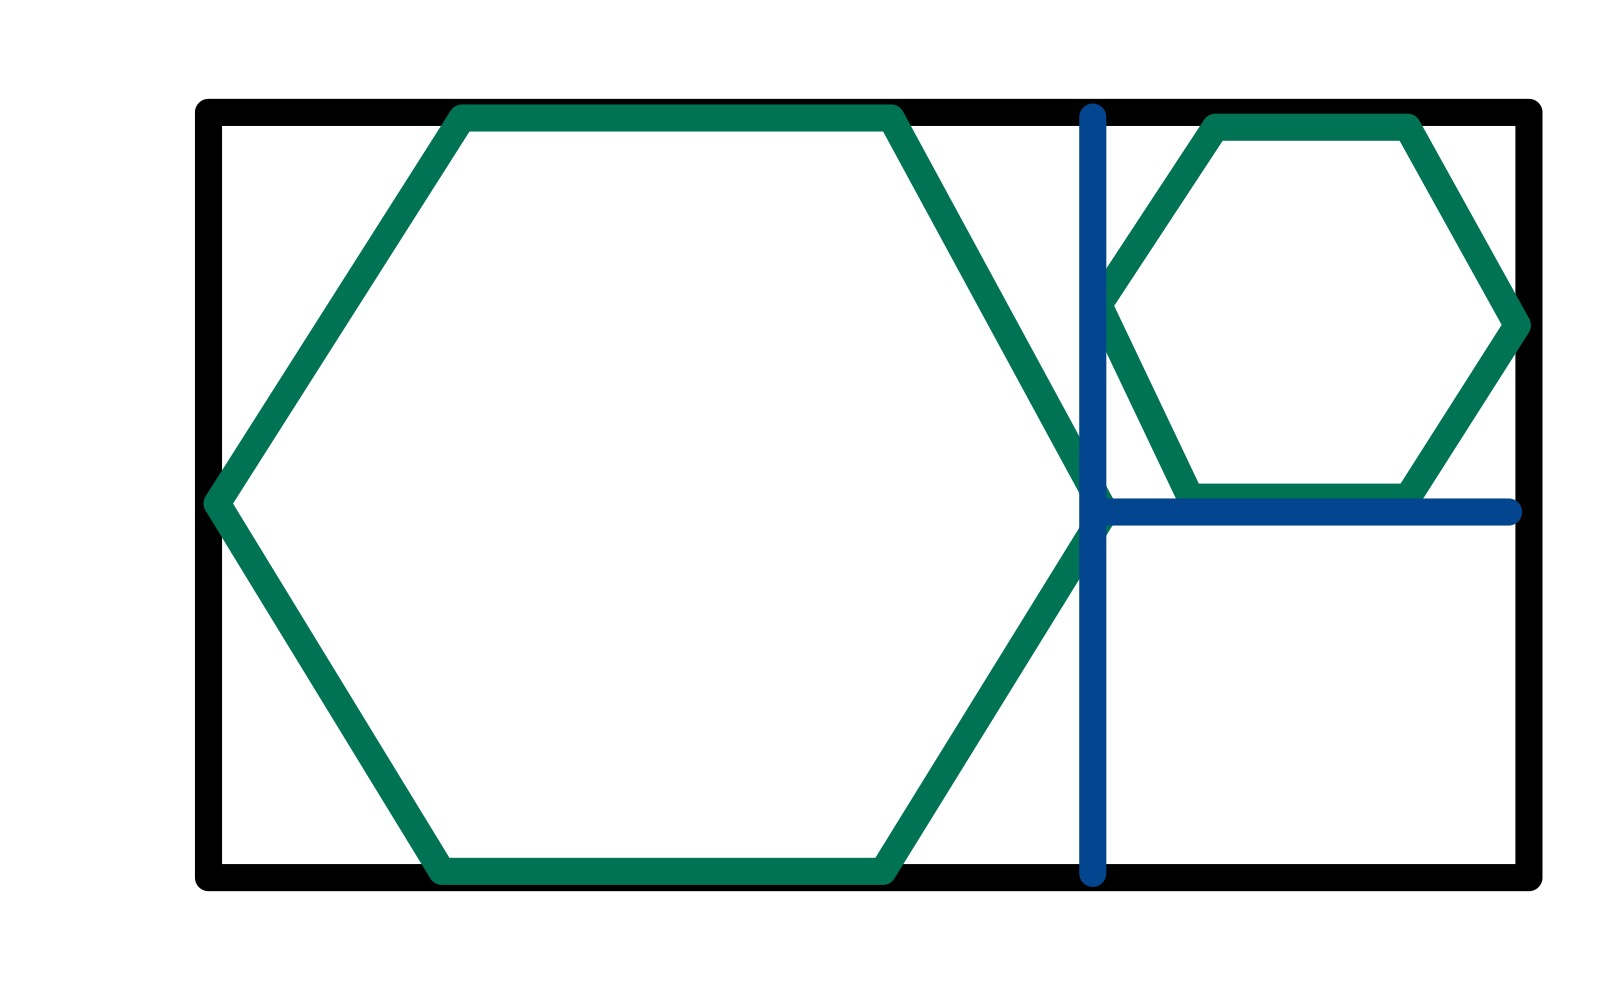 Three hexagons and a rectangle slide